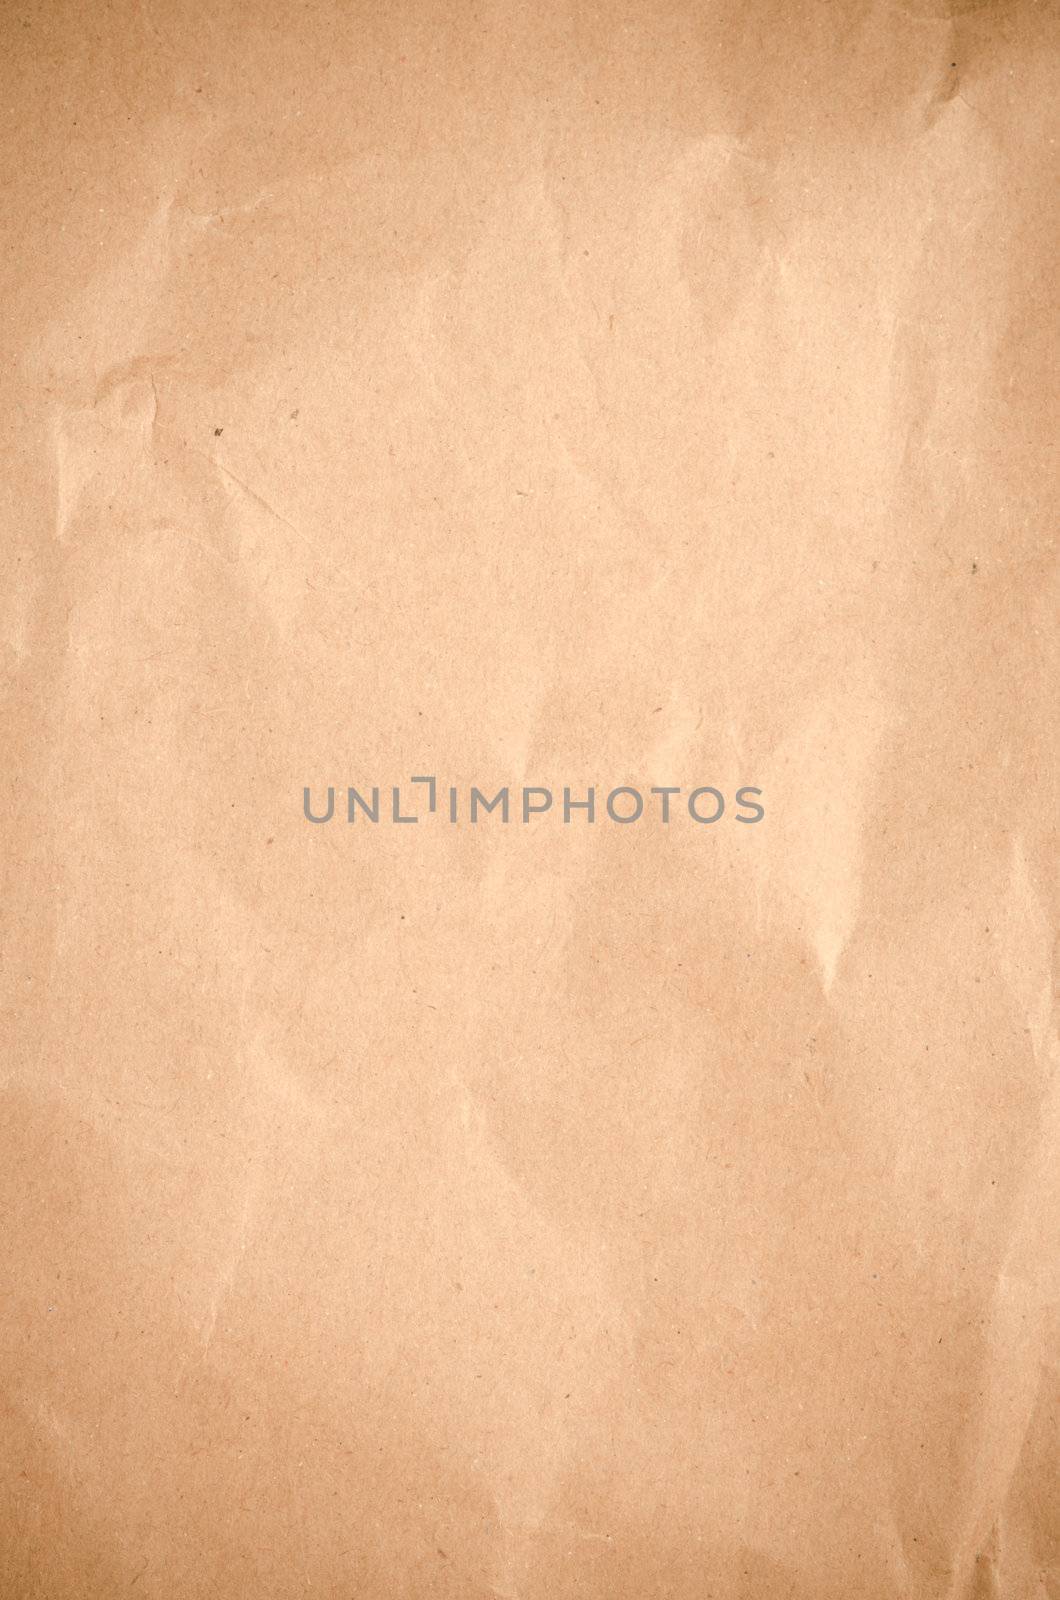 Abstract clean crumpled packaging paper texture.